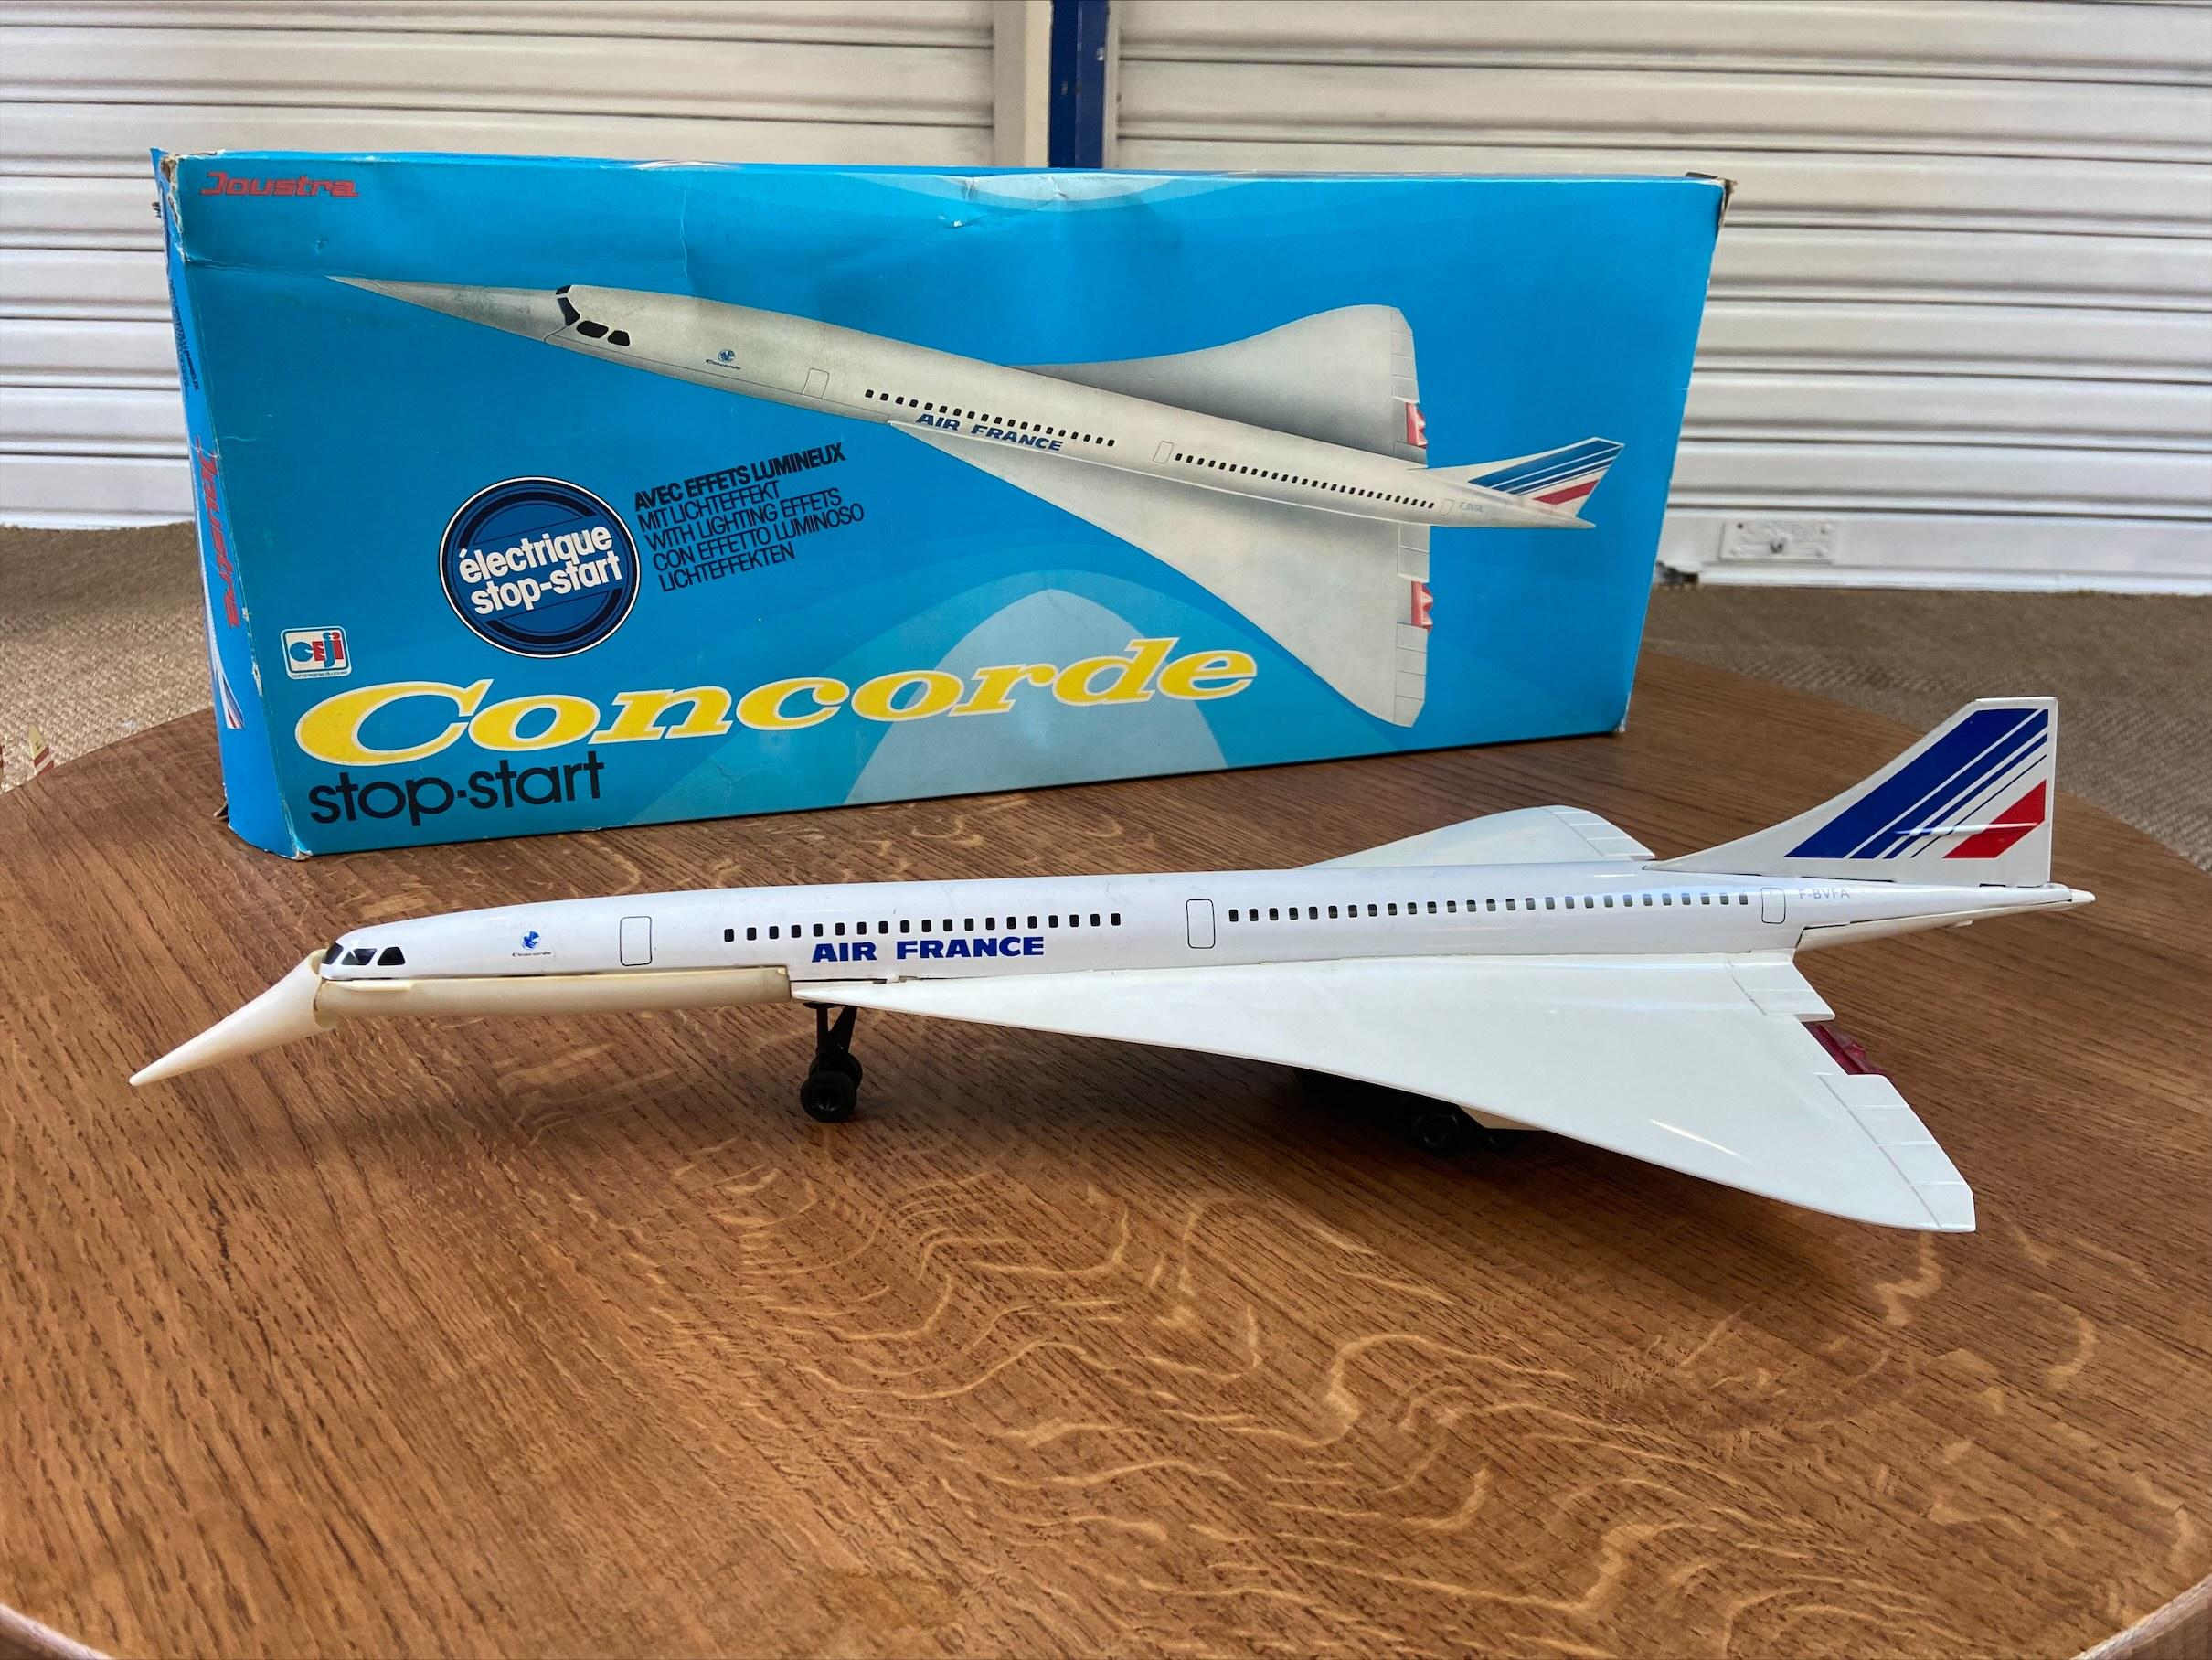 Collectible toy - Concorde 3 plane - 1970s
Electric guided
Joustra Edition
Measures: L59xP27xH13cm
Sheet metal and plastic
Circa 1970
Canned
In very good vintage condition (see pictures).